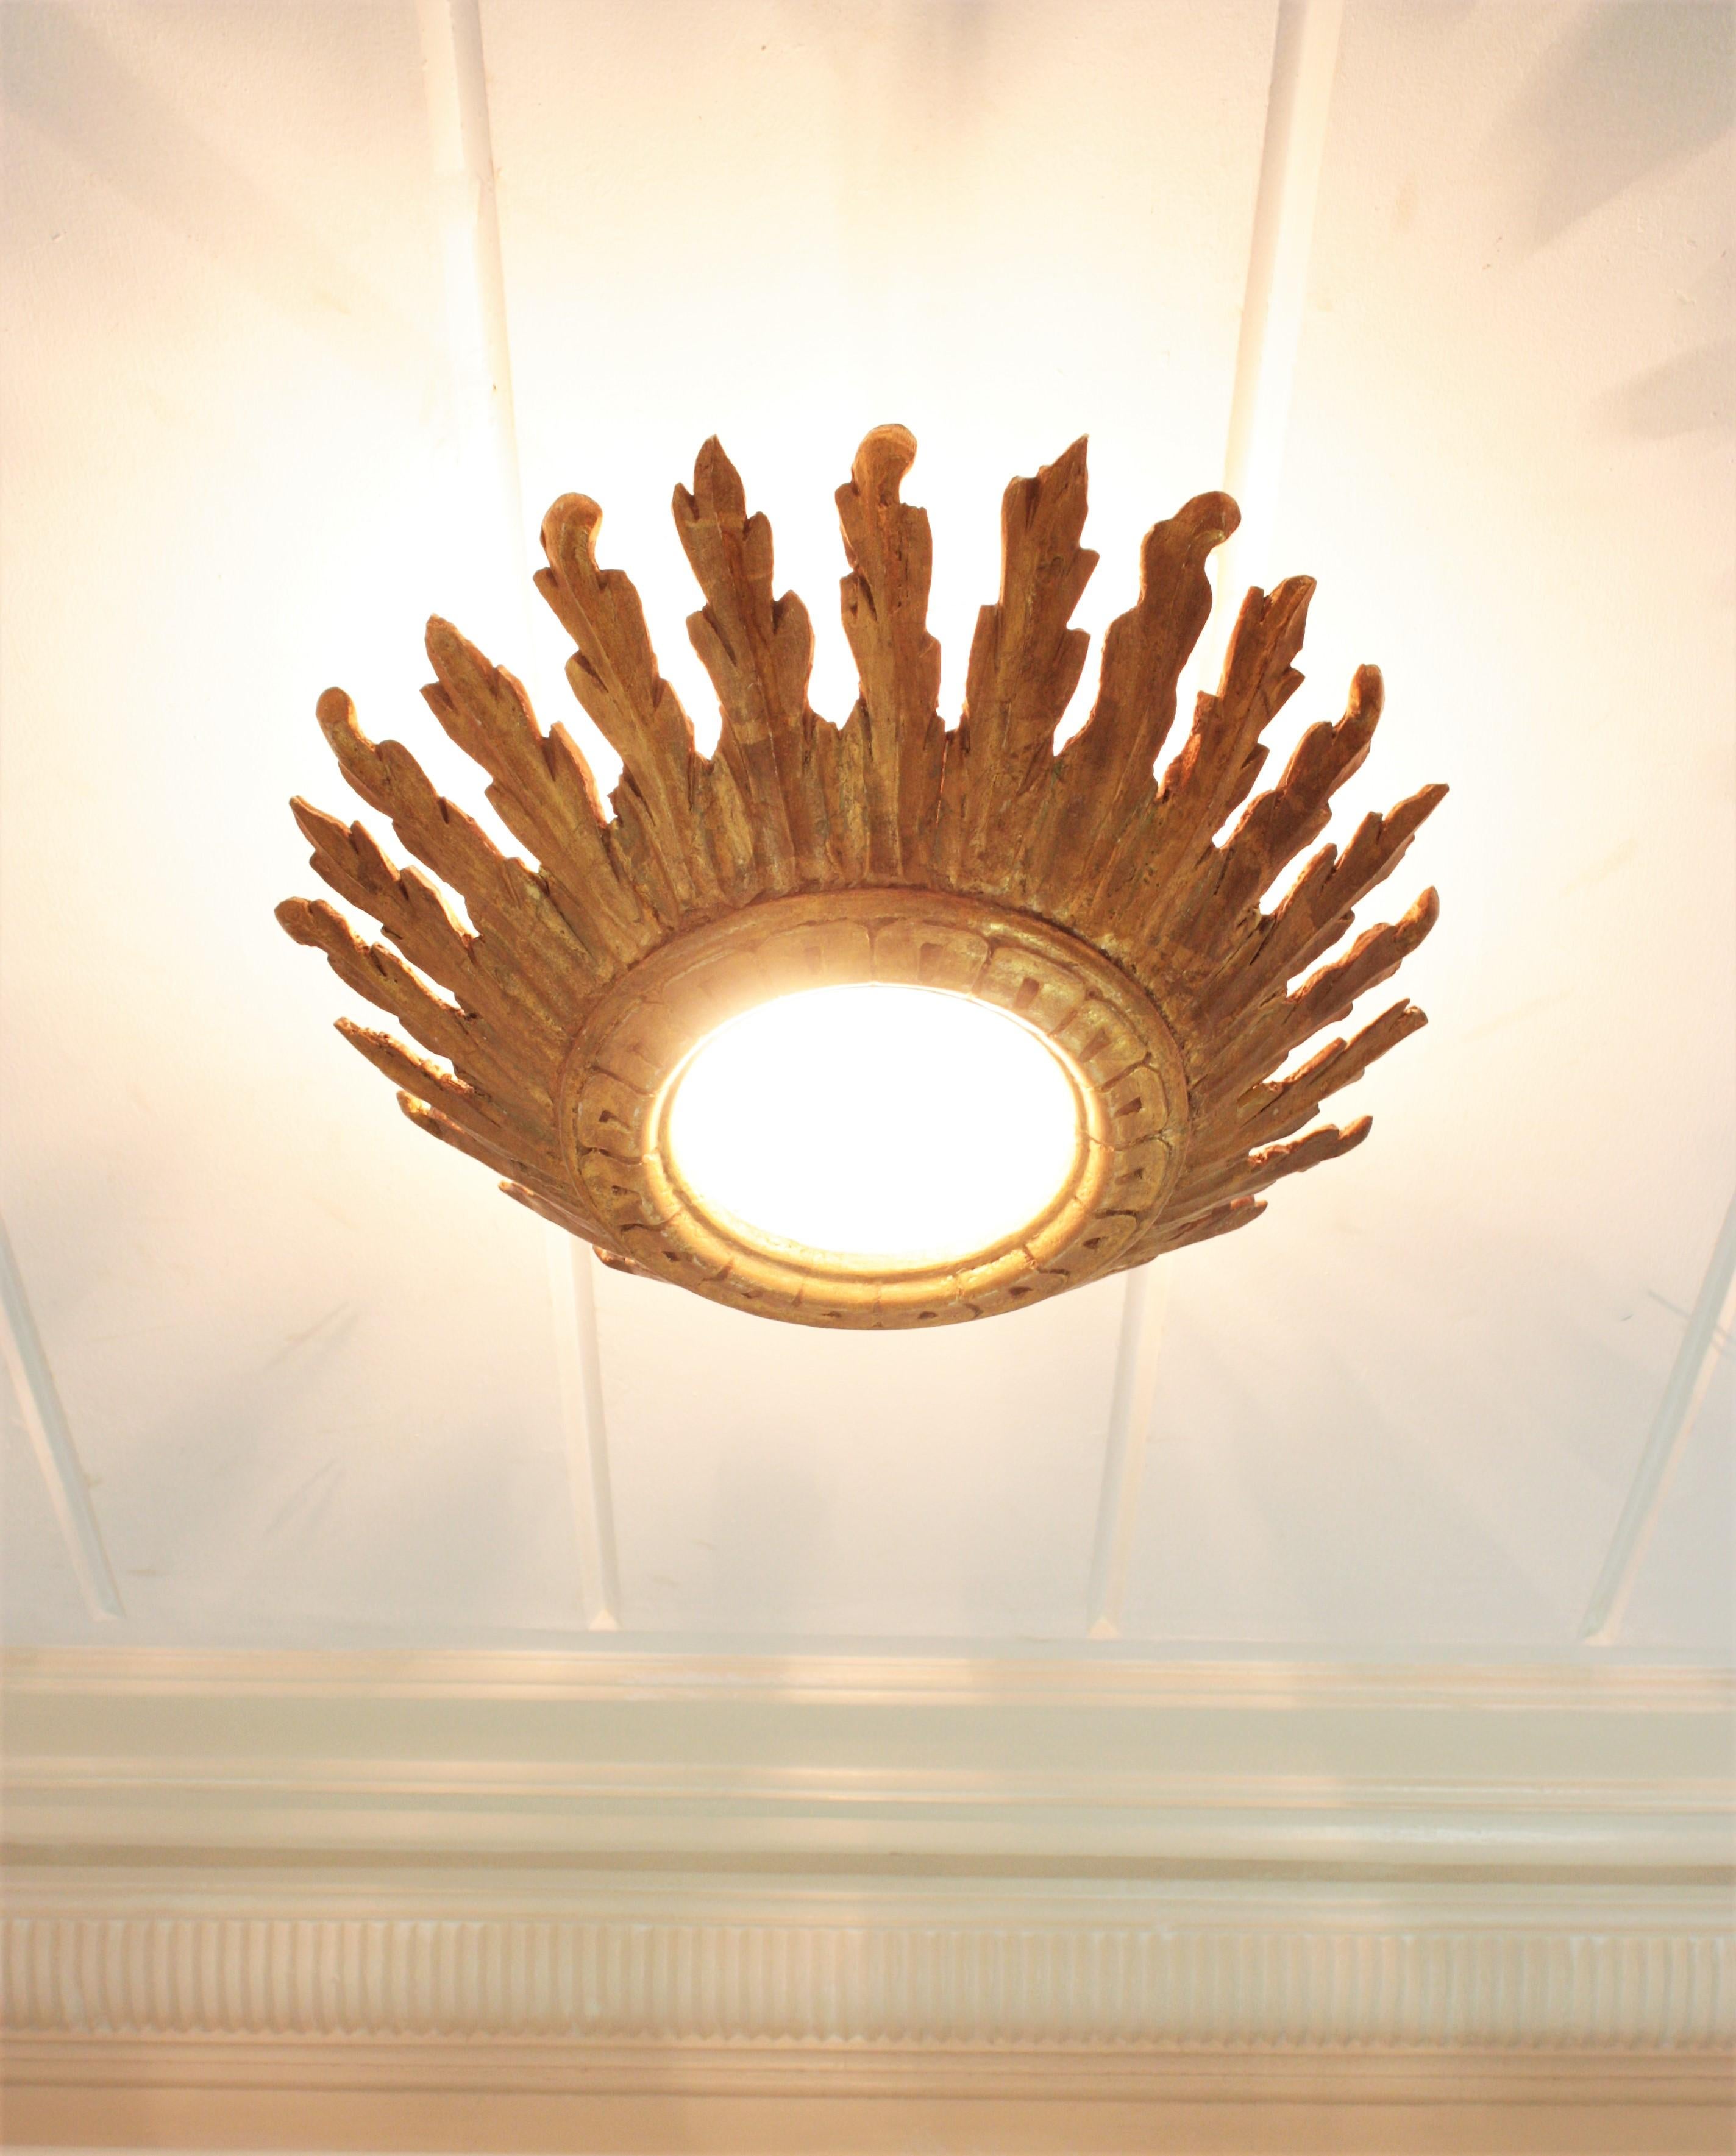 Sunburst Crown Ceiling Flush Mount Light Fixture in Giltwood, Spanish Baroque In Good Condition For Sale In Barcelona, ES